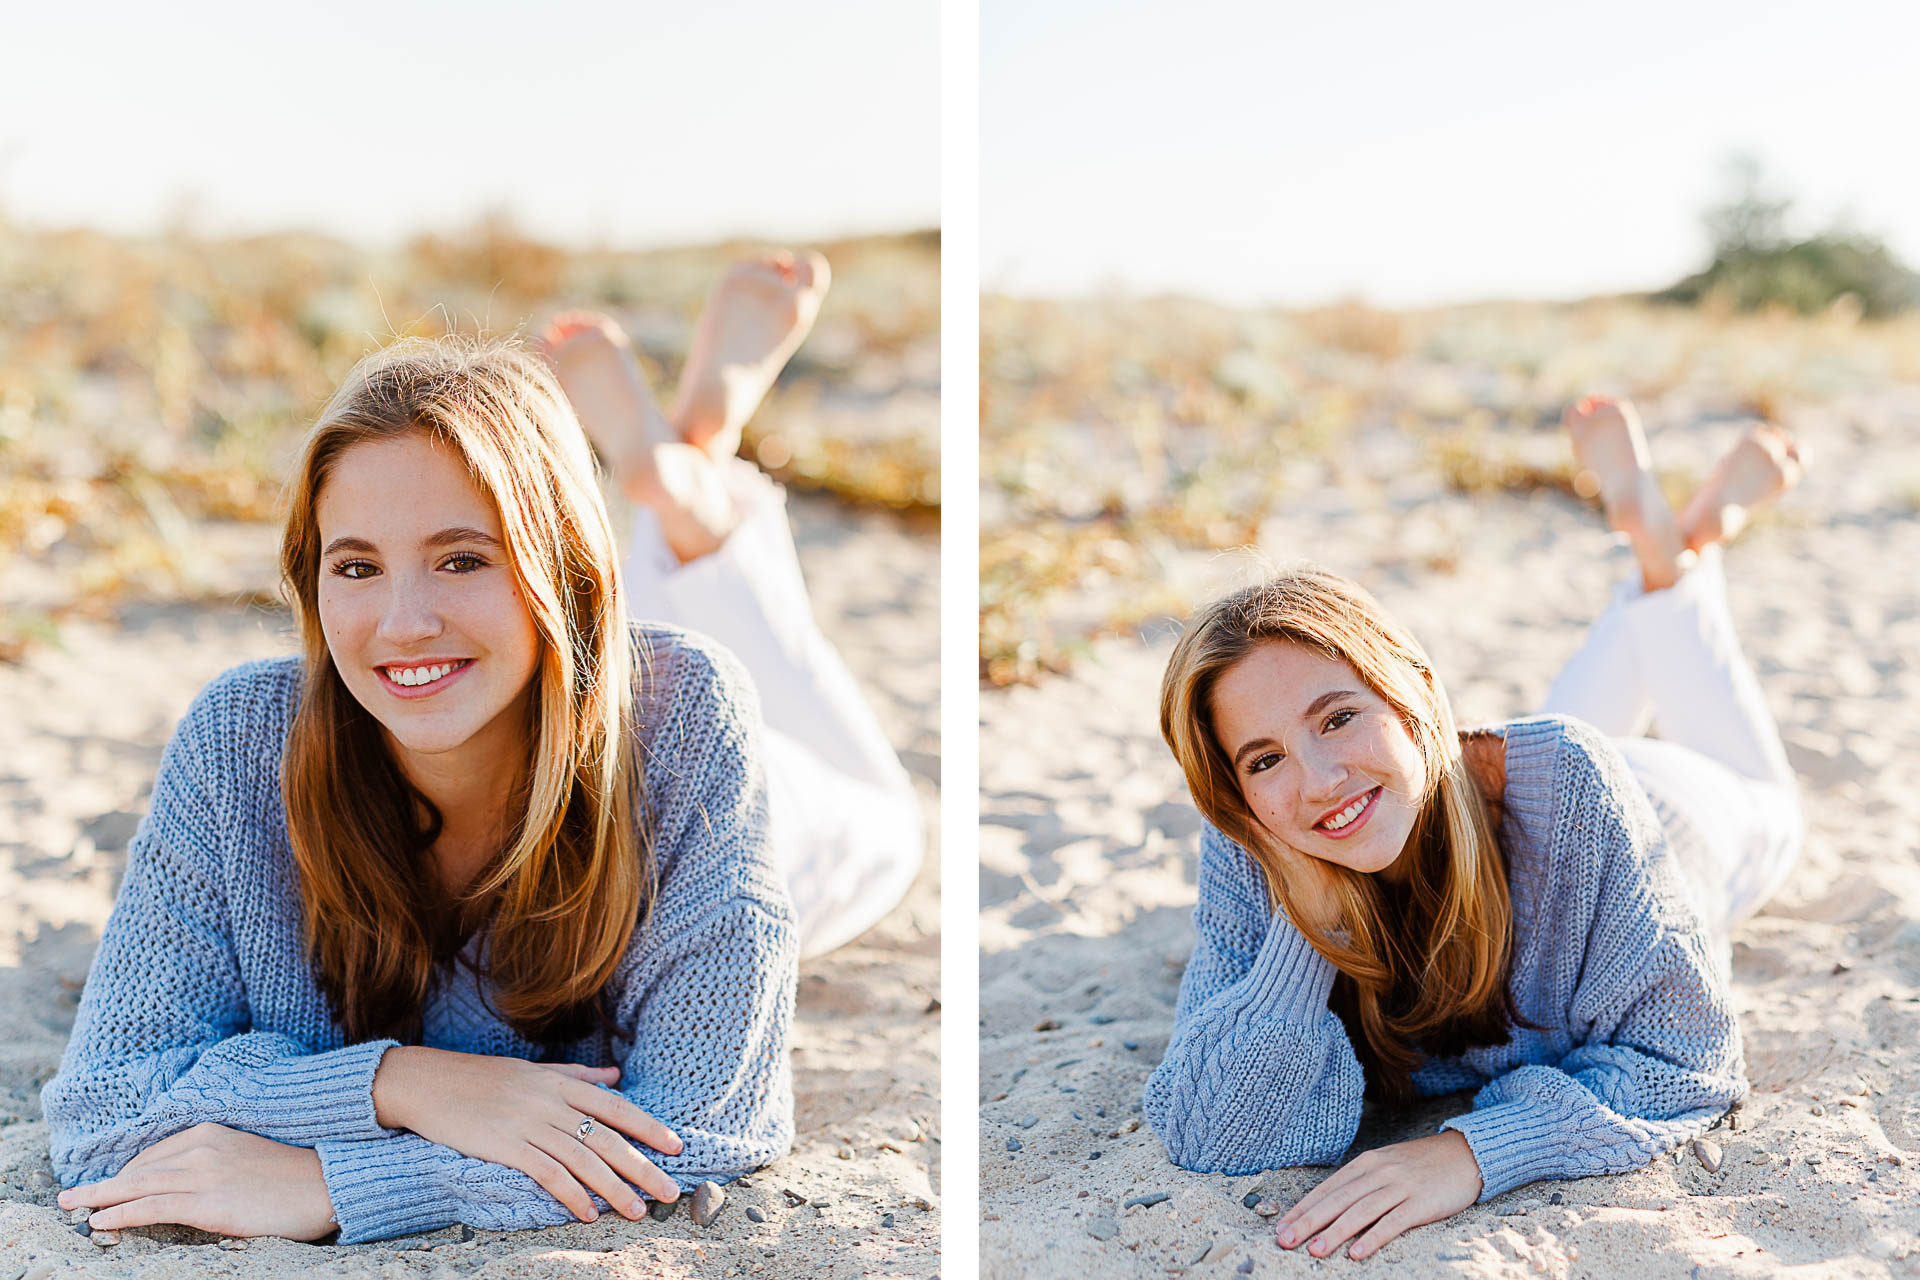 Photo by Cohasset senior photographer Christina Runnals | High school senior girl laying on the sand at a Cohasset beach and smiling